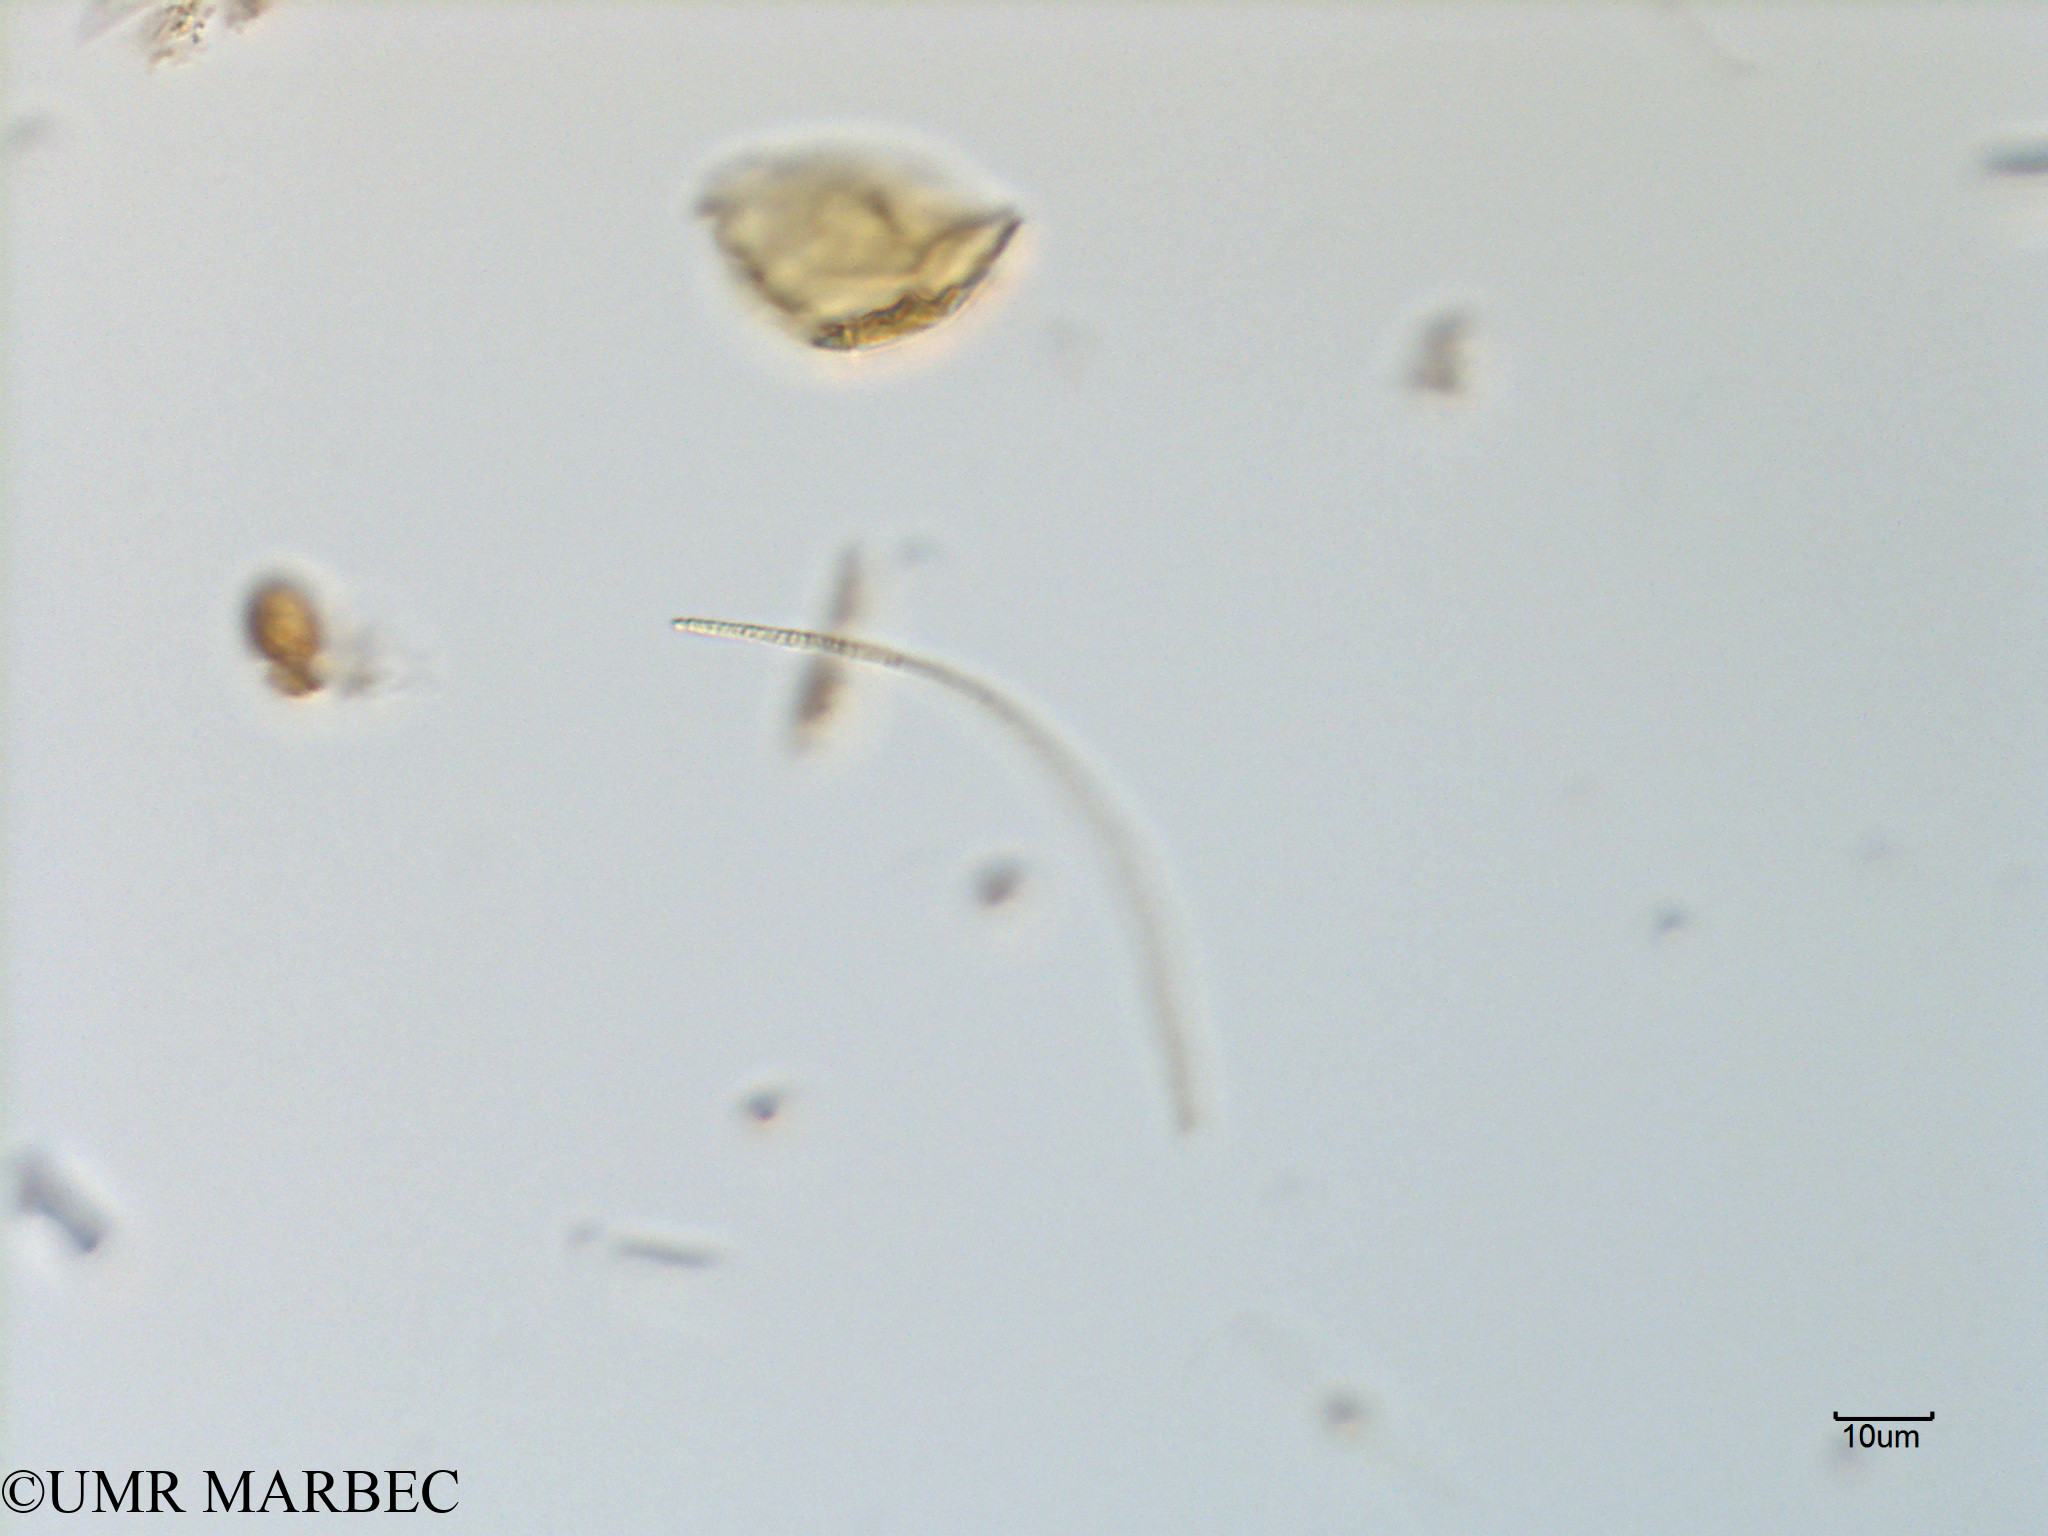 phyto/Scattered_Islands/mayotte_lagoon/SIREME May 2016/Oscillatoriale spp (MAY11_cyano-4).tif(copy).jpg